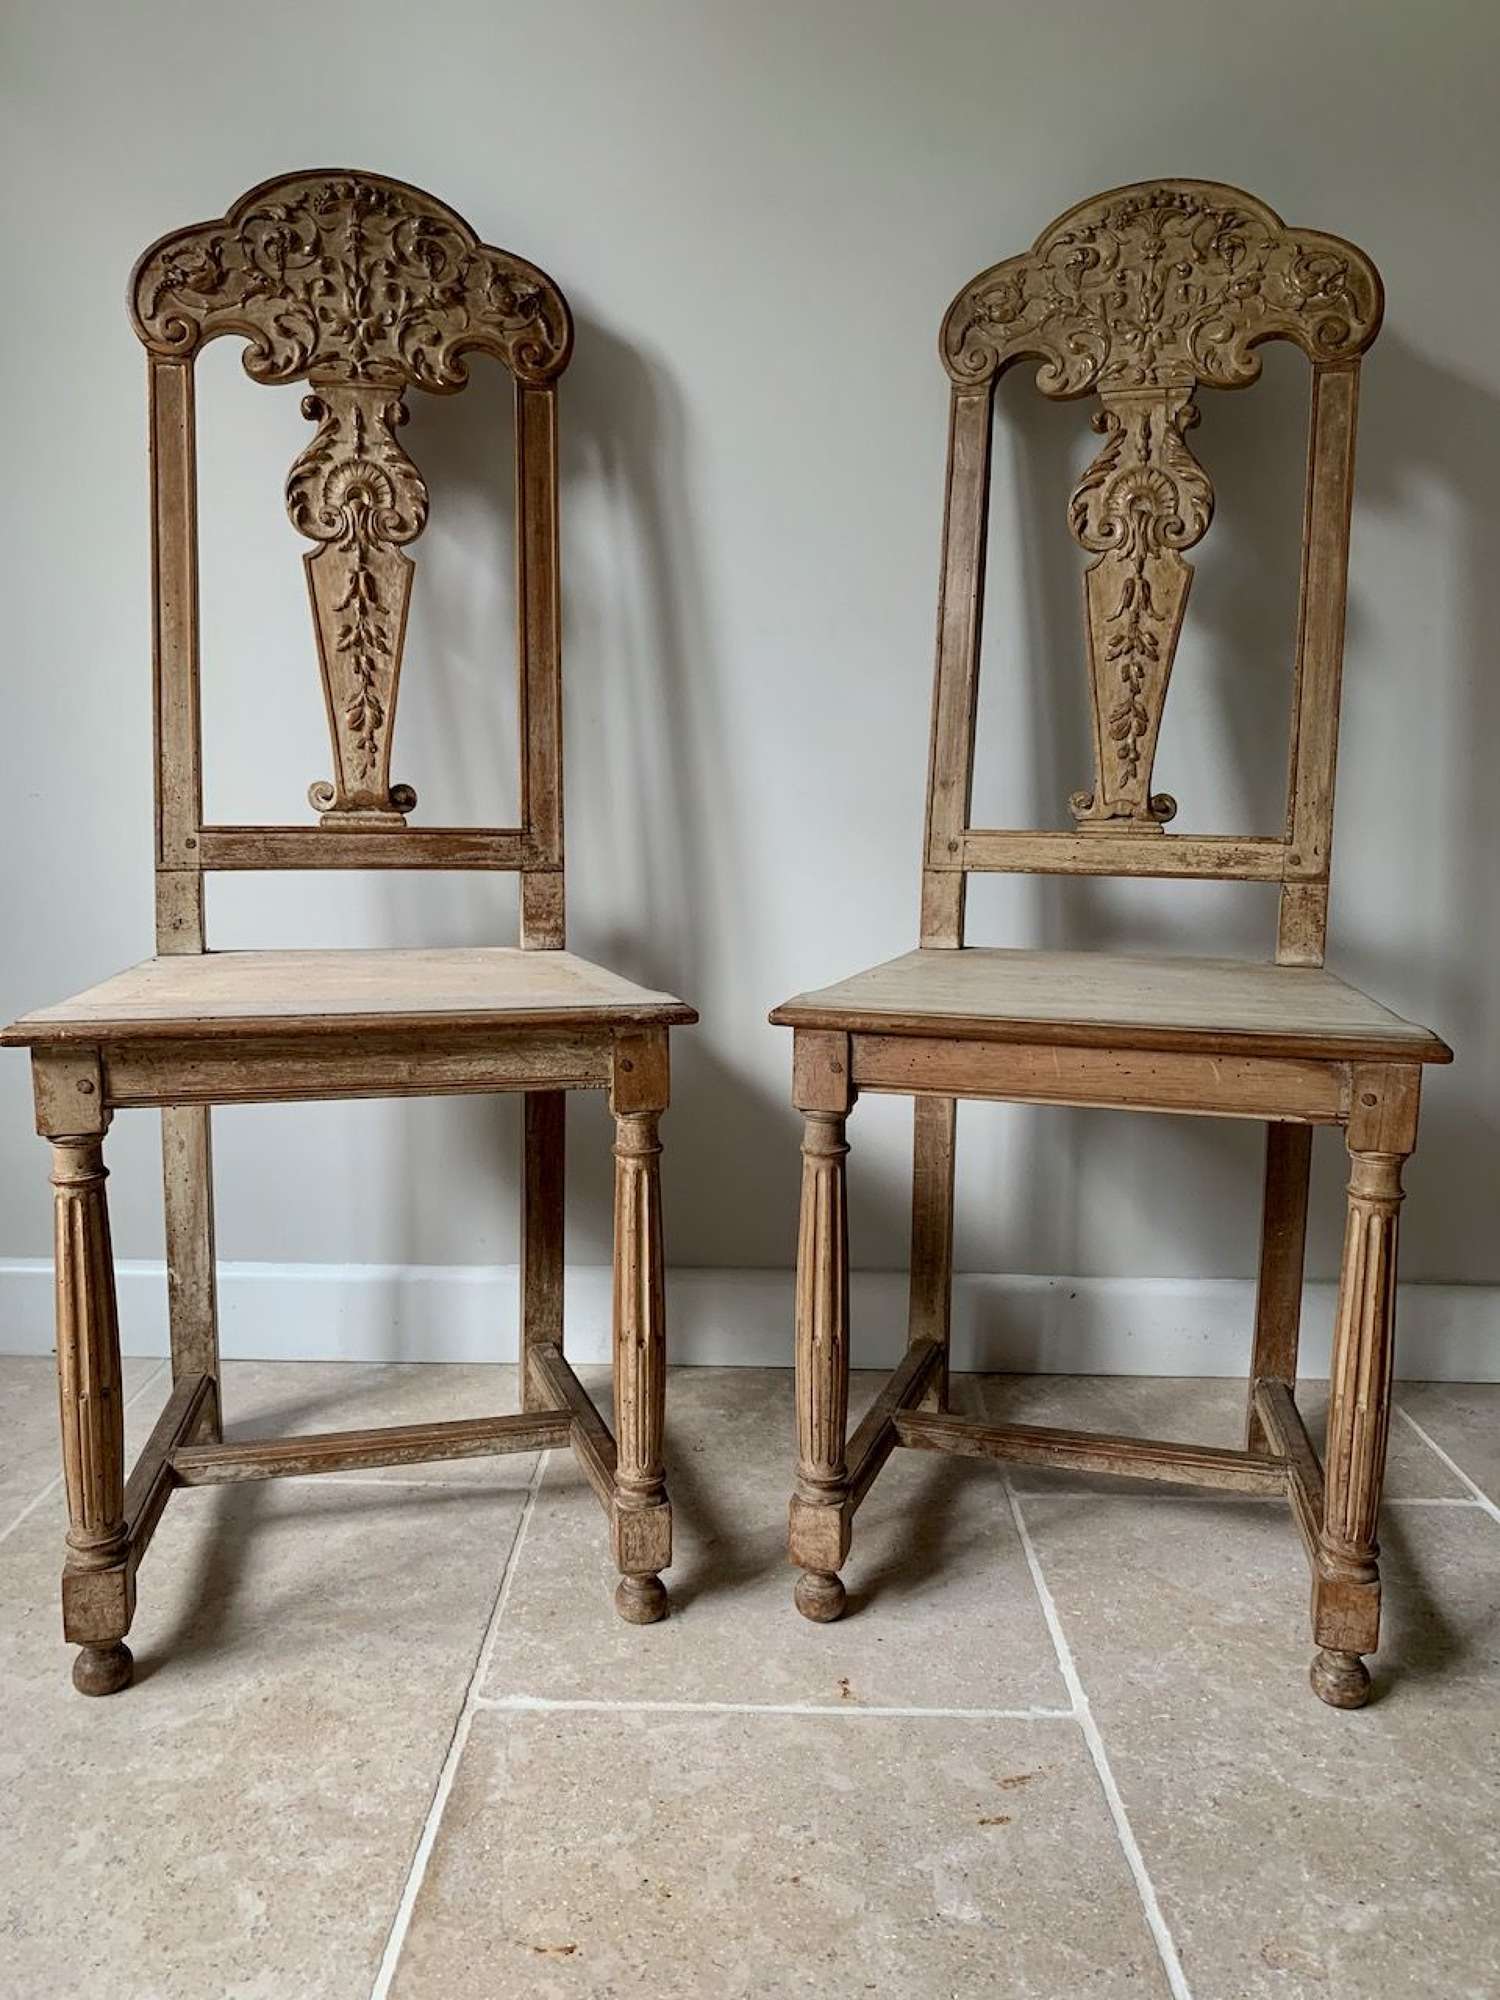 Pair of carved and limed walnut chairs